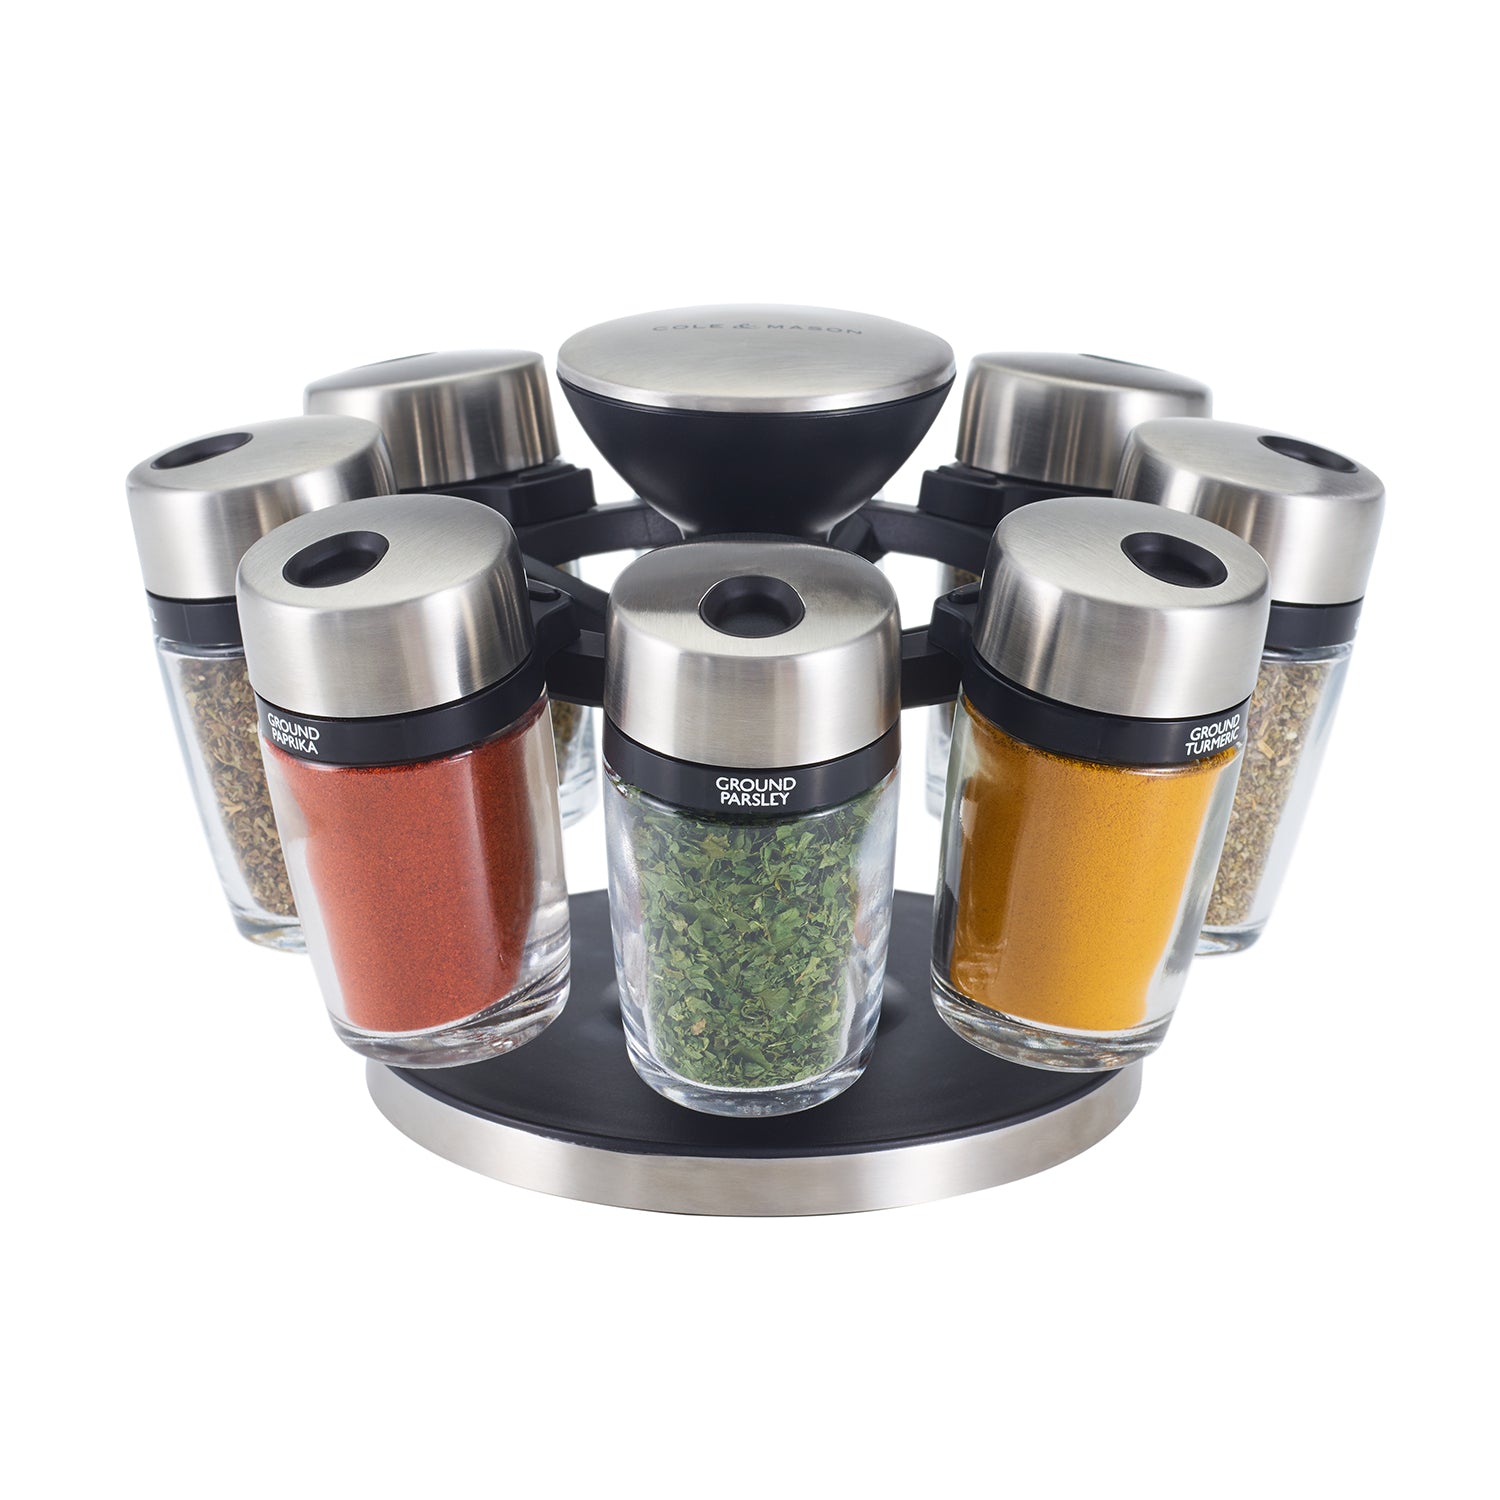 Cole & Mason Premium 8 Jar Filled Herb & Spice Carousel, Stainless Steel & Glass, 13.5cm